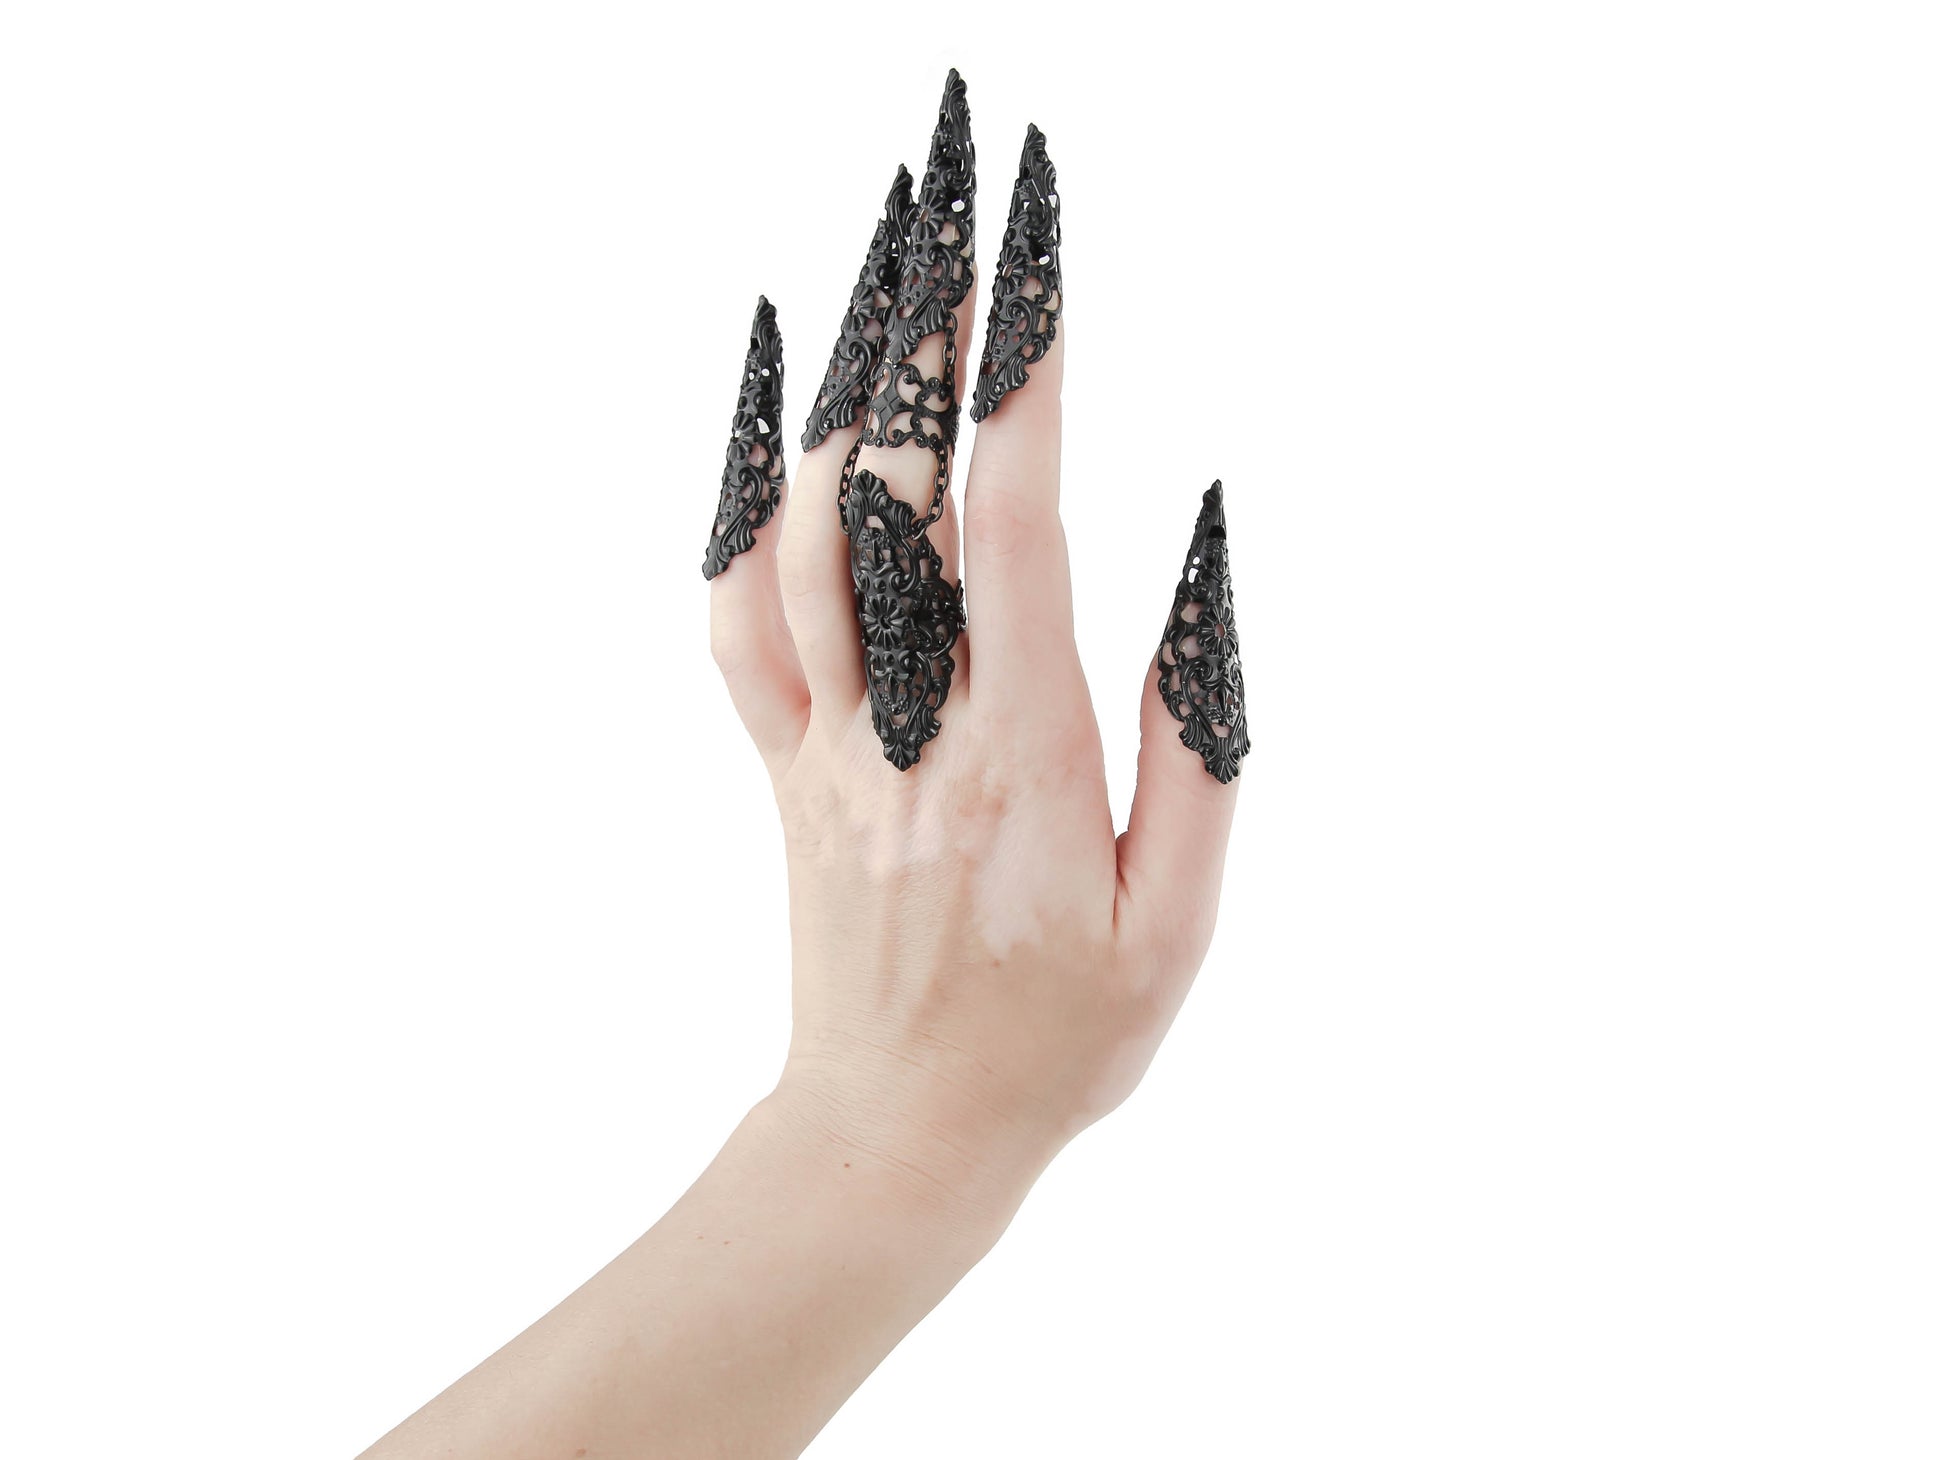 A hand is elegantly adorned with Myril Jewels' black full finger claw ring and black metal claws, each piece showcasing intricate filigree work. The neo-gothic design perfectly embodies the brand's dark-avantgarde ethos, suitable for gothic, whimsigoth, and witchcore styles. These bold statement pieces are ideal for Halloween, everyday wear, or as a dramatic accessory for rave parties and festivals, highlighting Myril's commitment to unique gothic-chic jewelry.